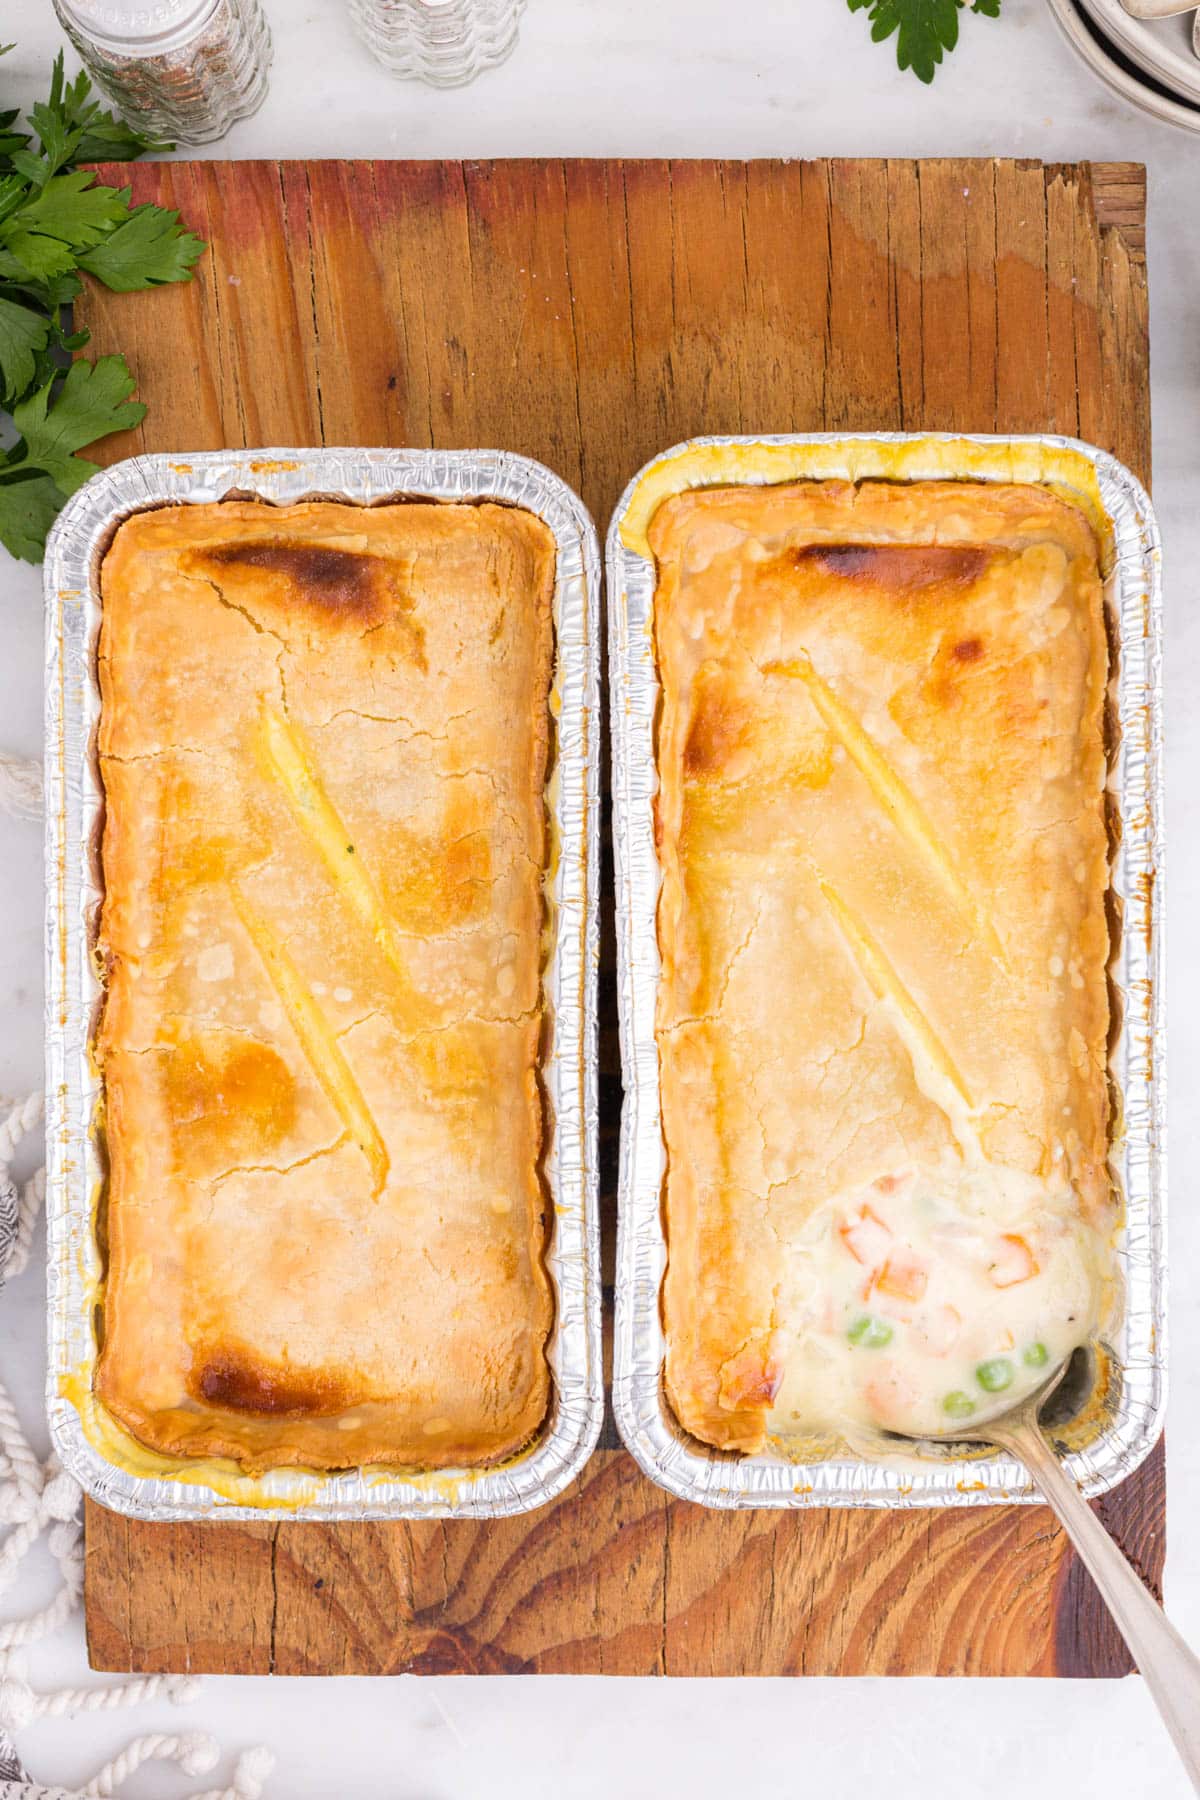 Two baked Freezer Chicken Pot Pies on a wooden kitchen board.